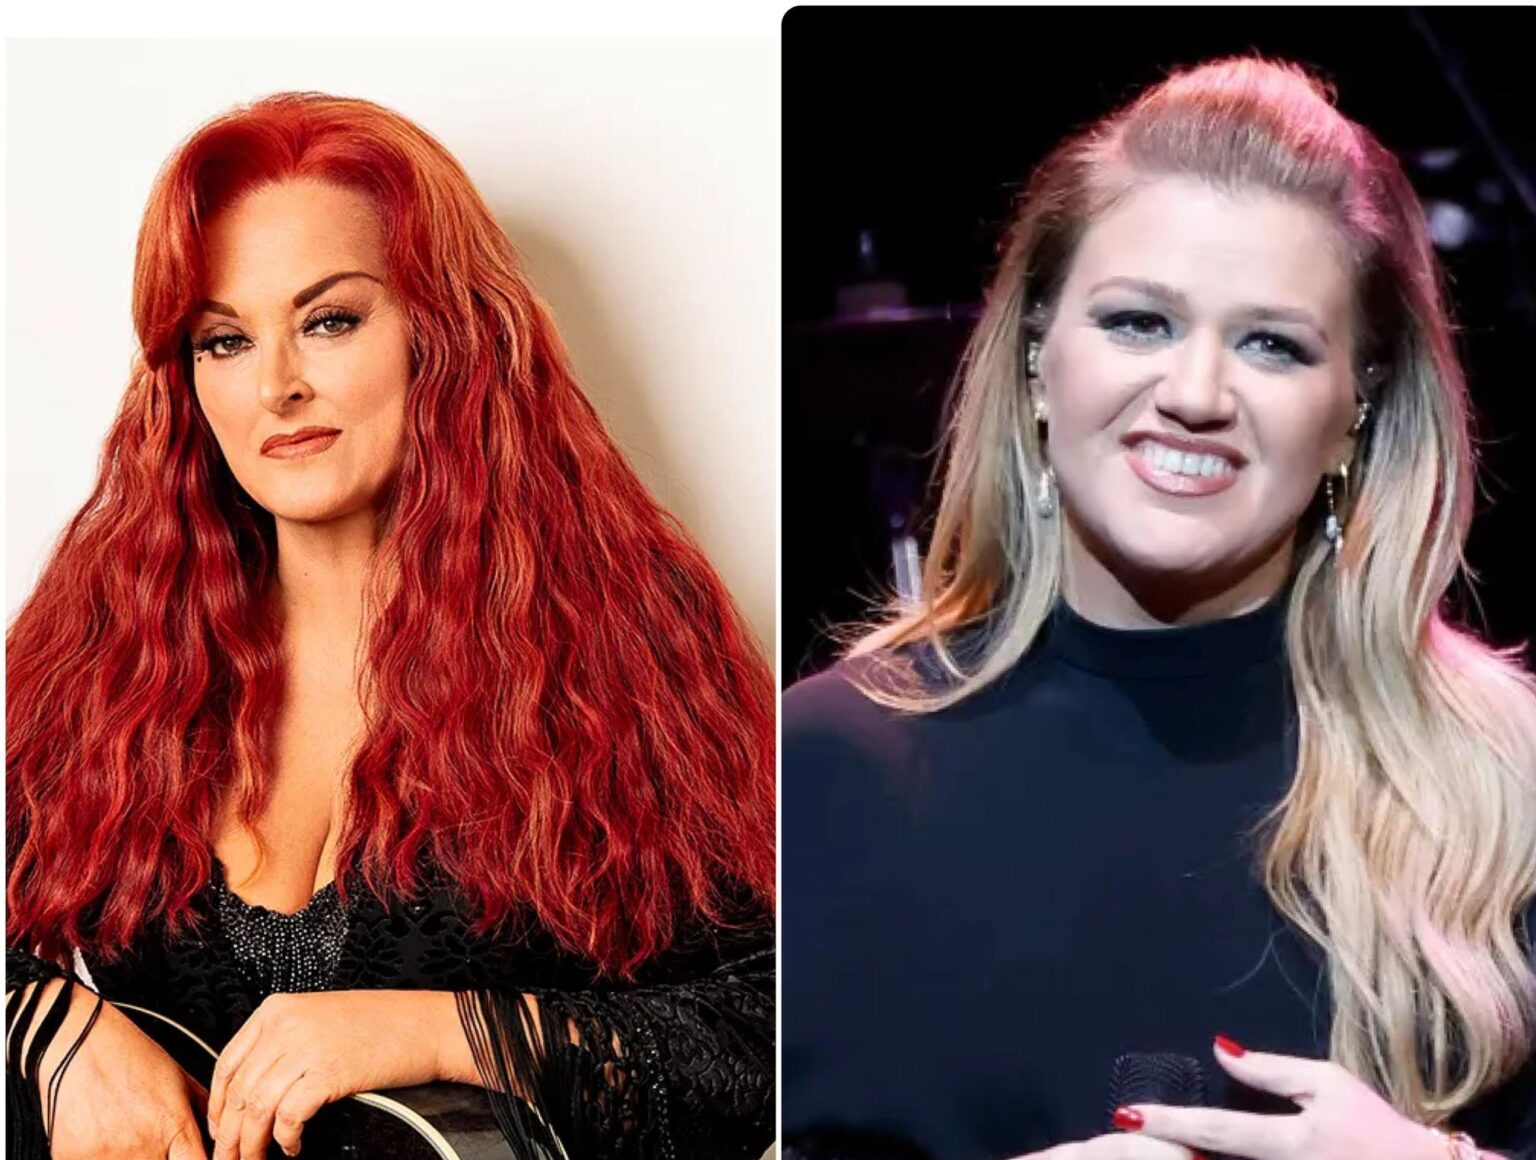 Wynonna Judd To Host ‘Christmas At The Opry’ Kelly Clarkson & More To